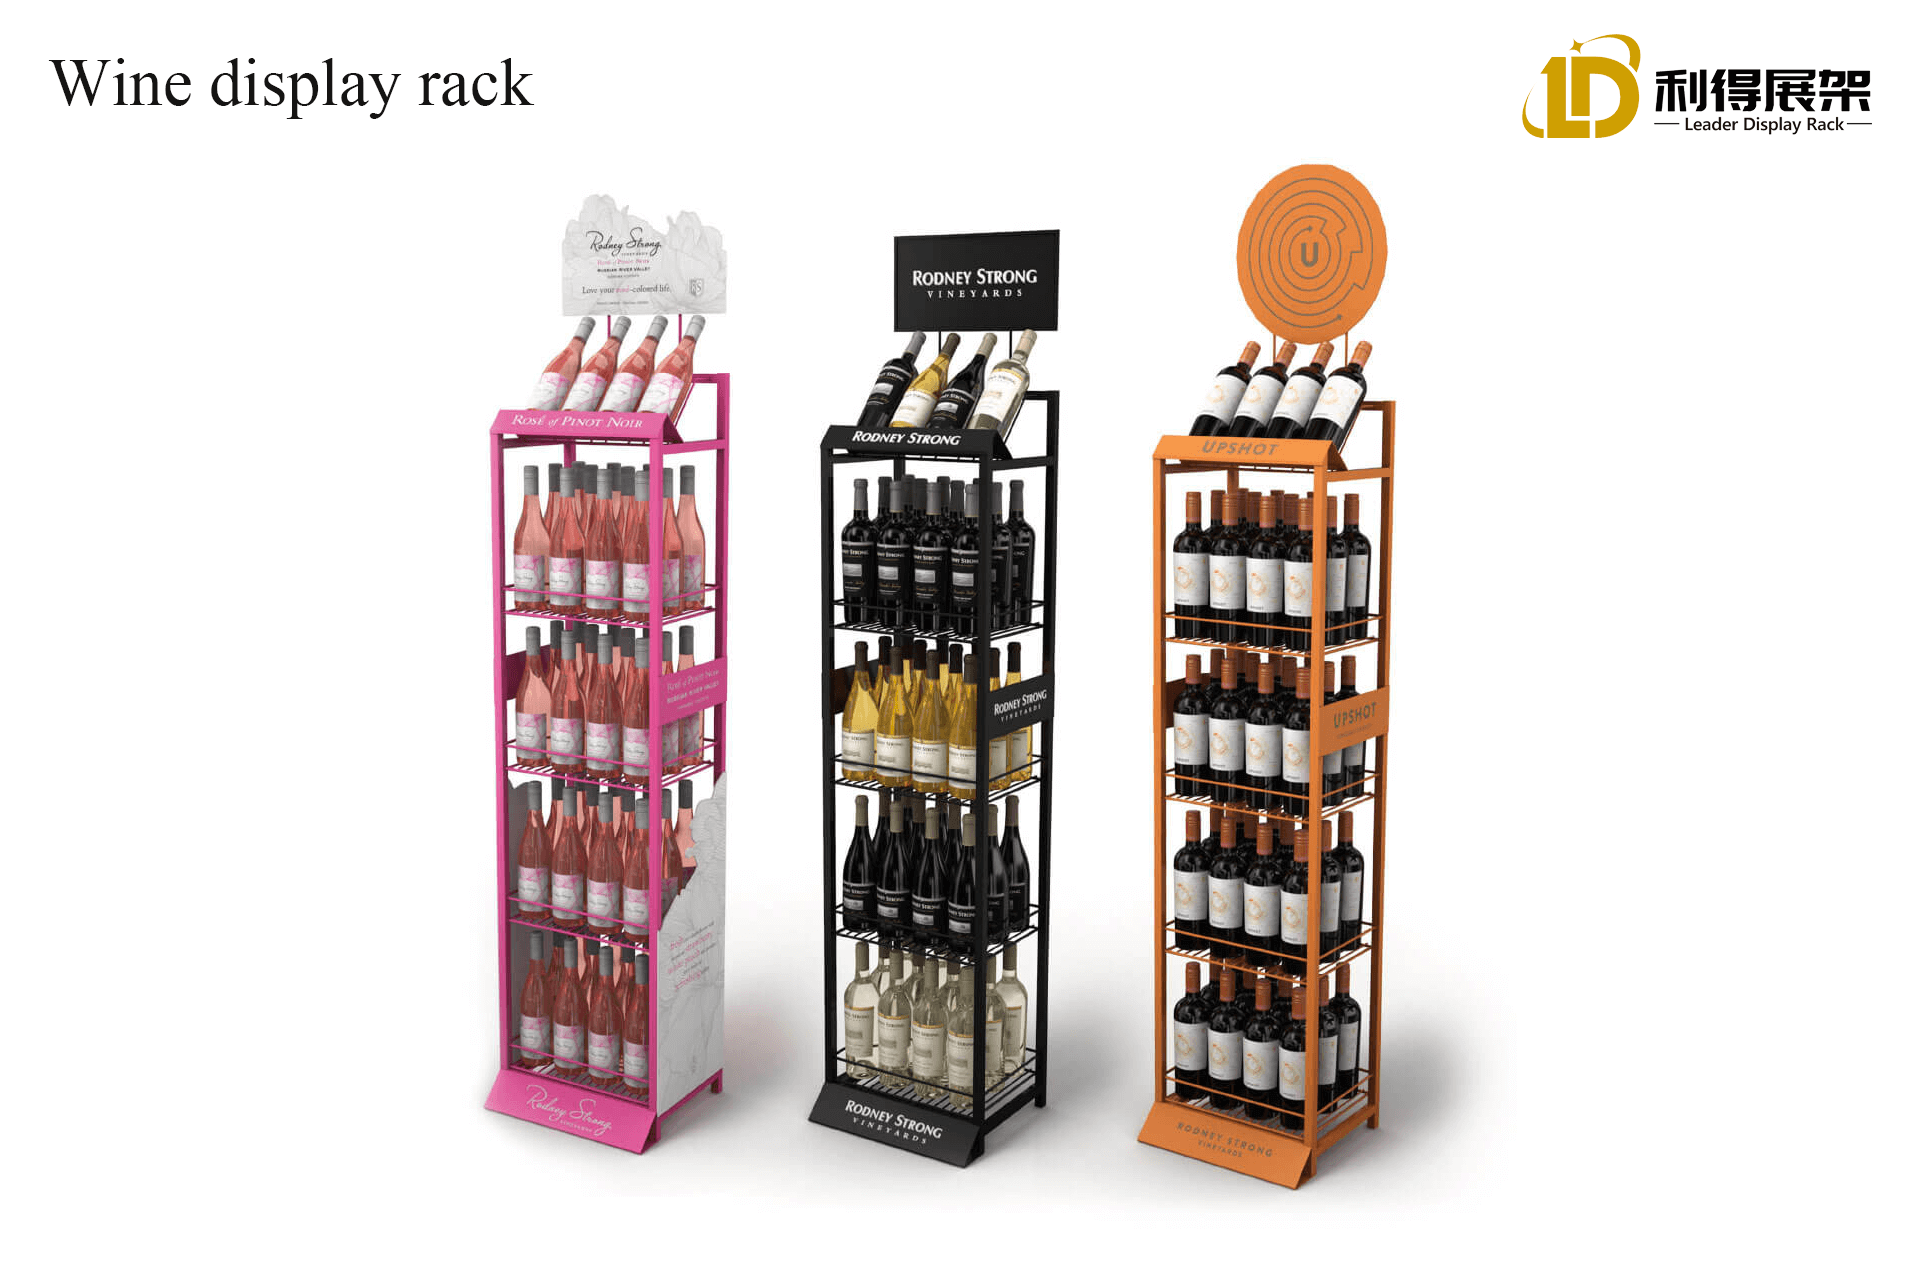 Brand Display And Sales Tools, The Rise of Personalized Custom Wine Display Rack